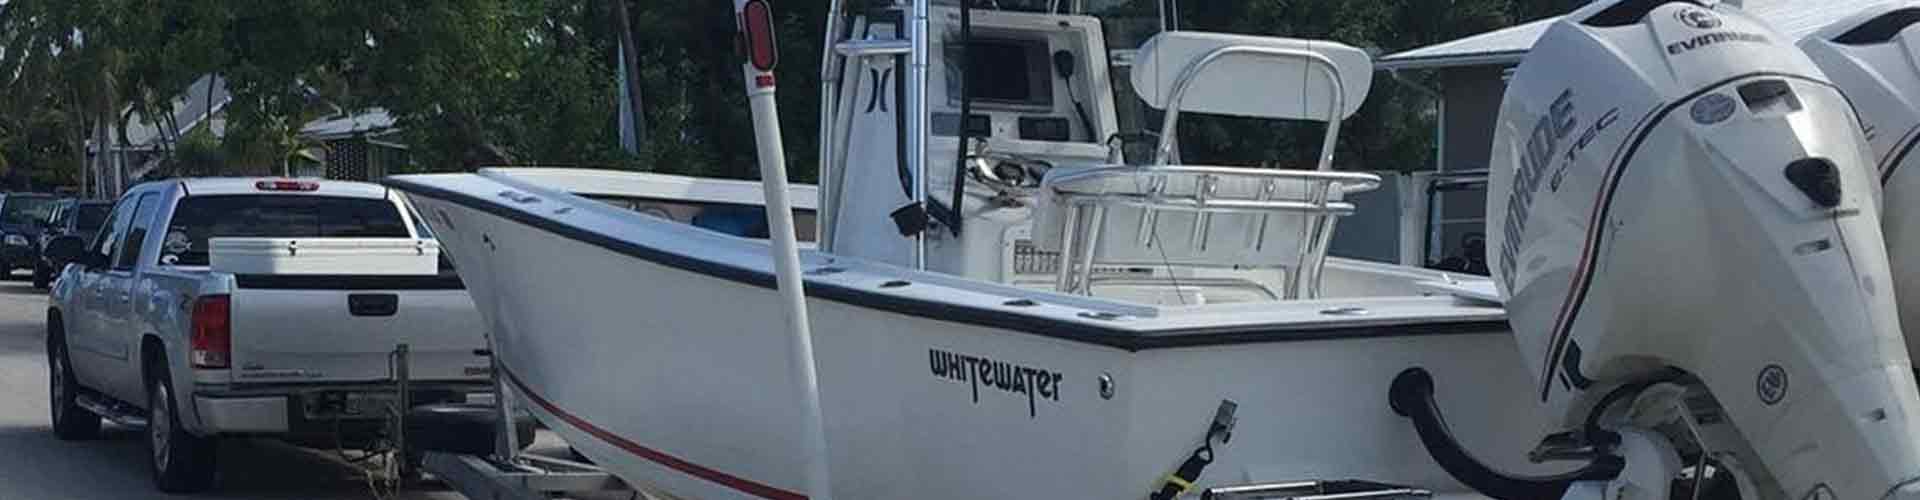 Whitewater Boat for Key West offshore fishing charters